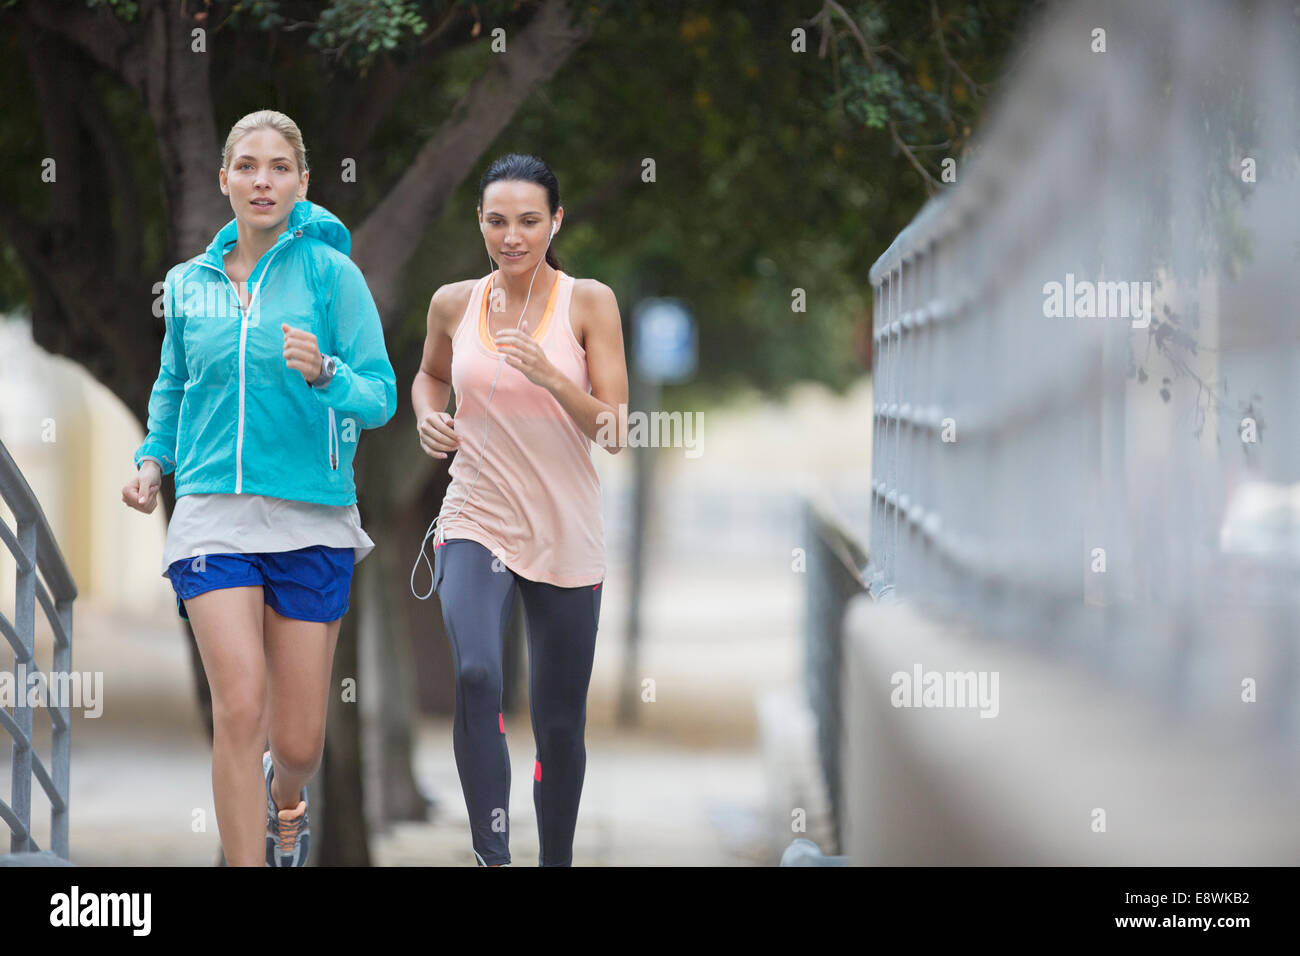 Young Woman In Sports Outfit Jogging In Public Park High-Res Stock